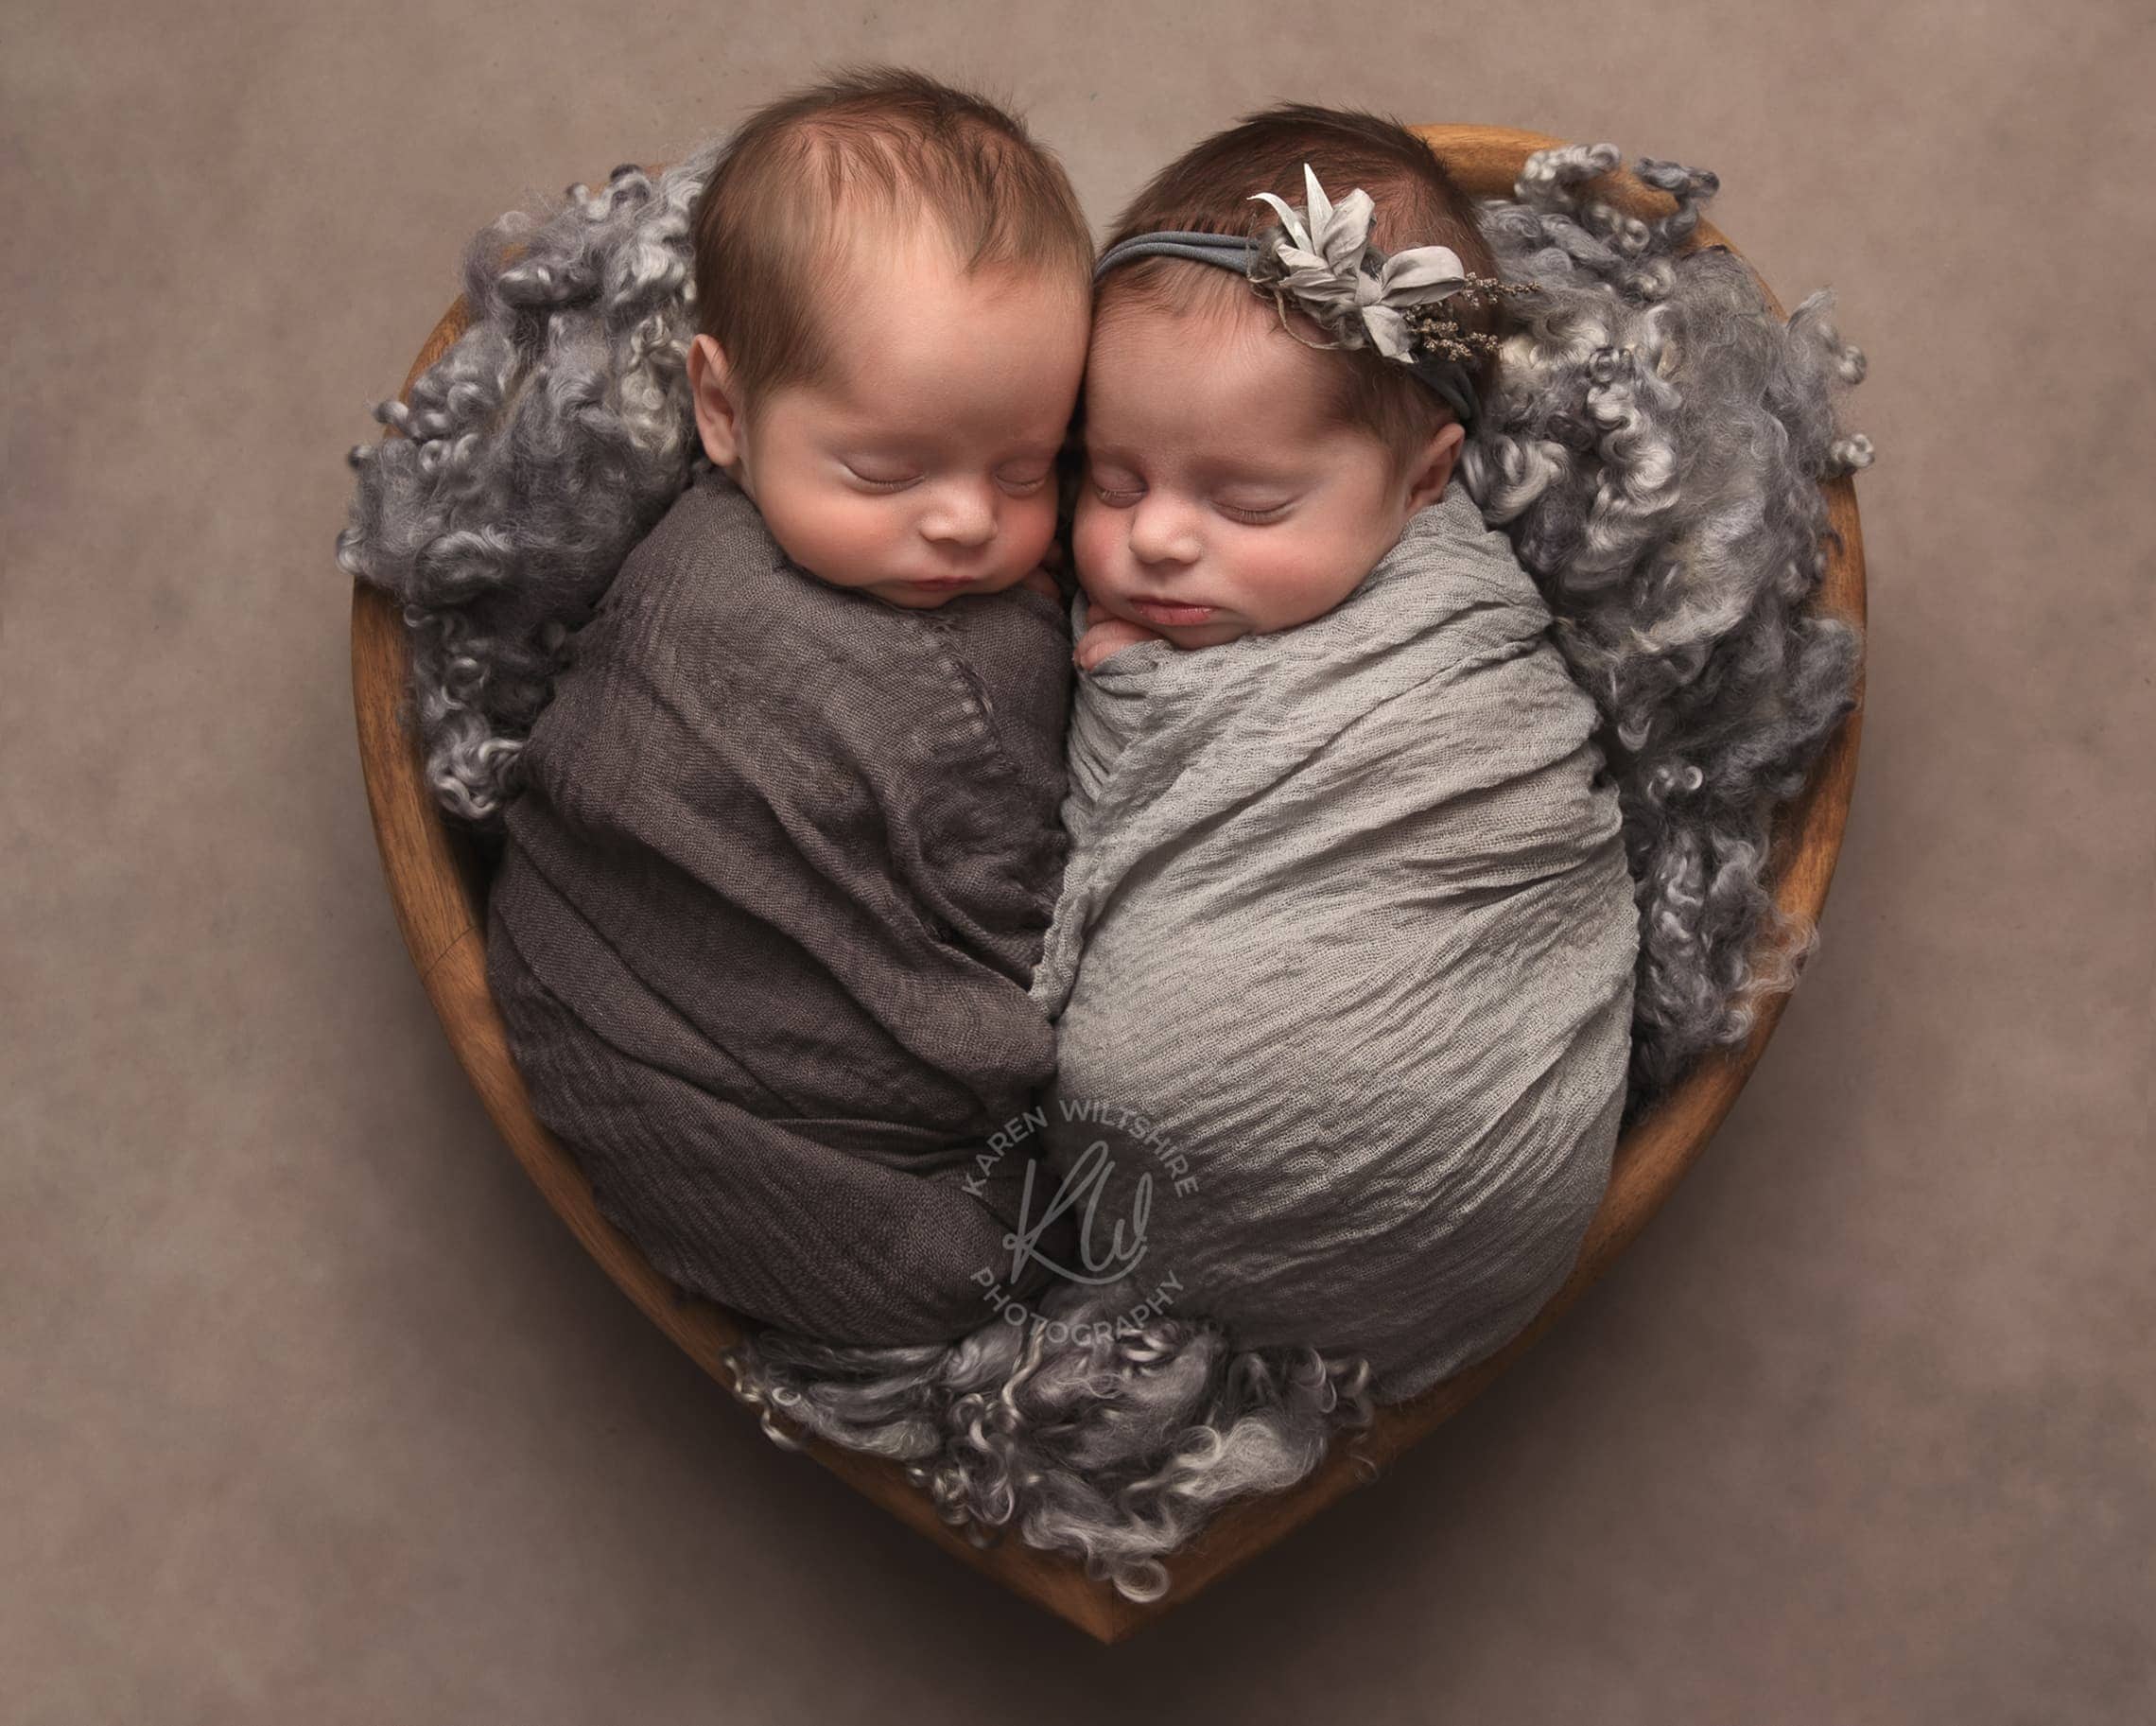 Boy and girl baby twins wrapped together sleeping